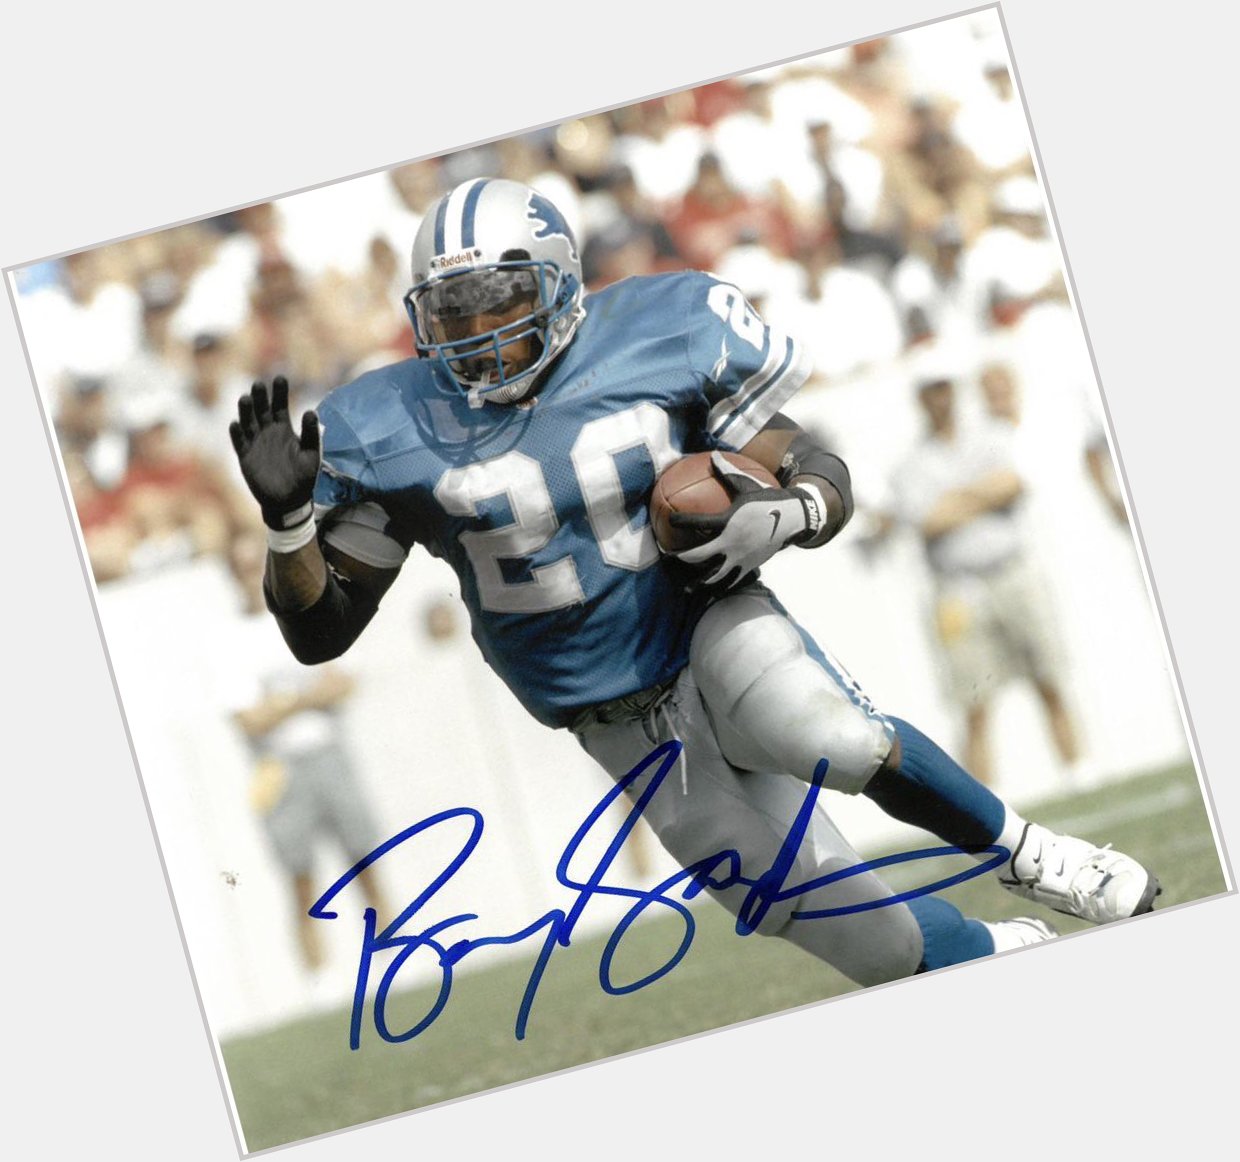 Happy Birthday Barry Sanders..
52 years young..
What a Player !!! 